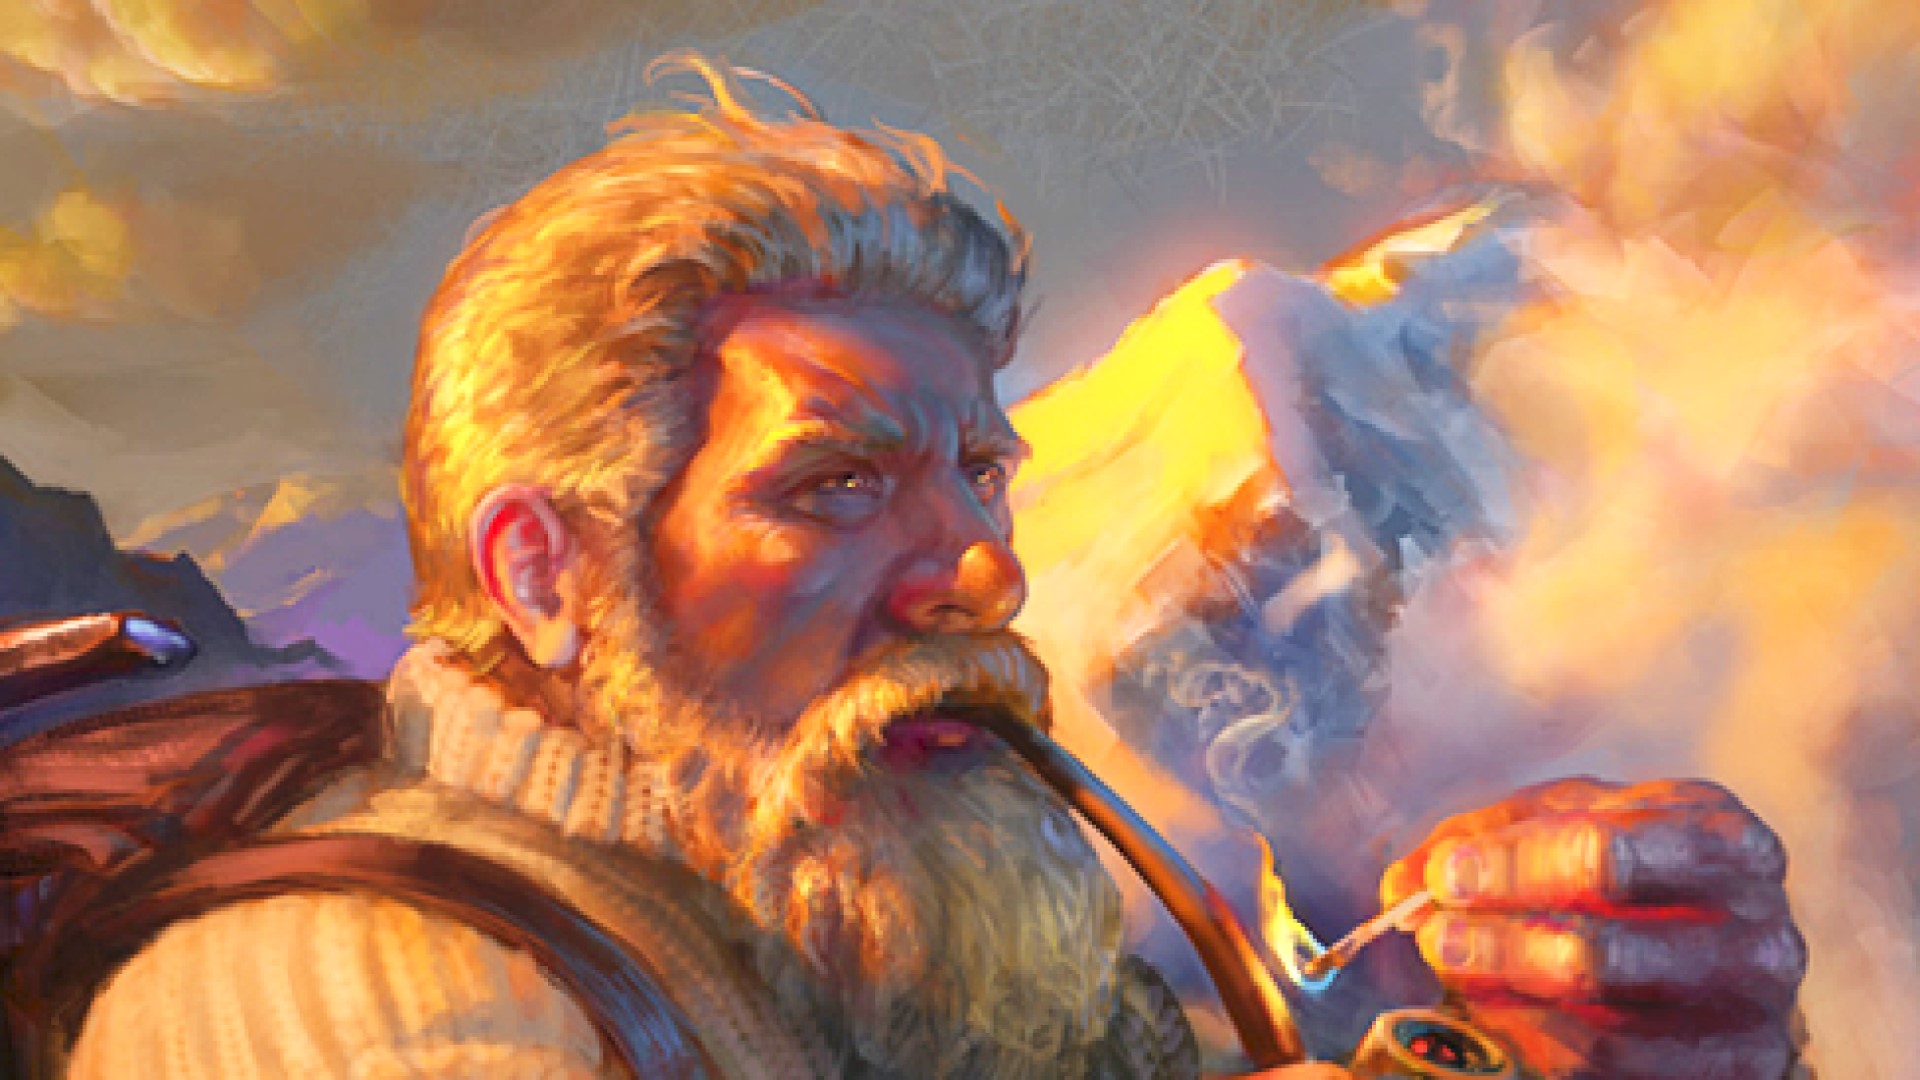 DnD level up a grey-beared dwarf lighting a pipe, on a snowy mountaintop.